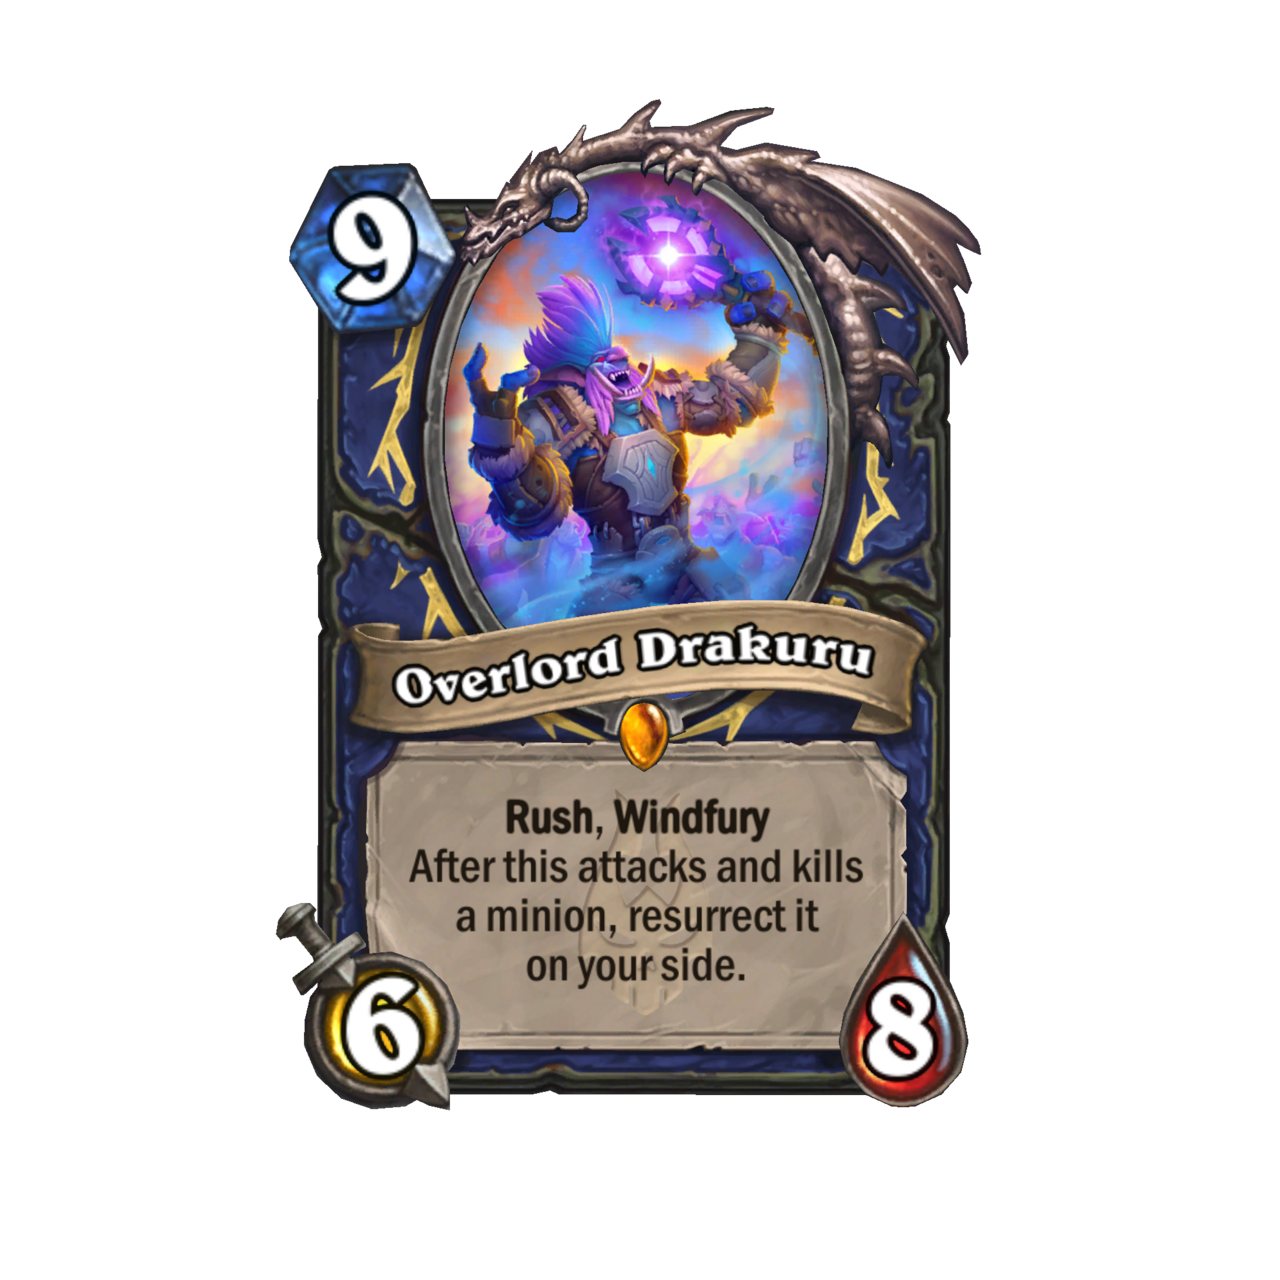 Lord Drakuru - Rush, Fury of the Wind.  After that attacks and kills the minion, resurrect him on your side.